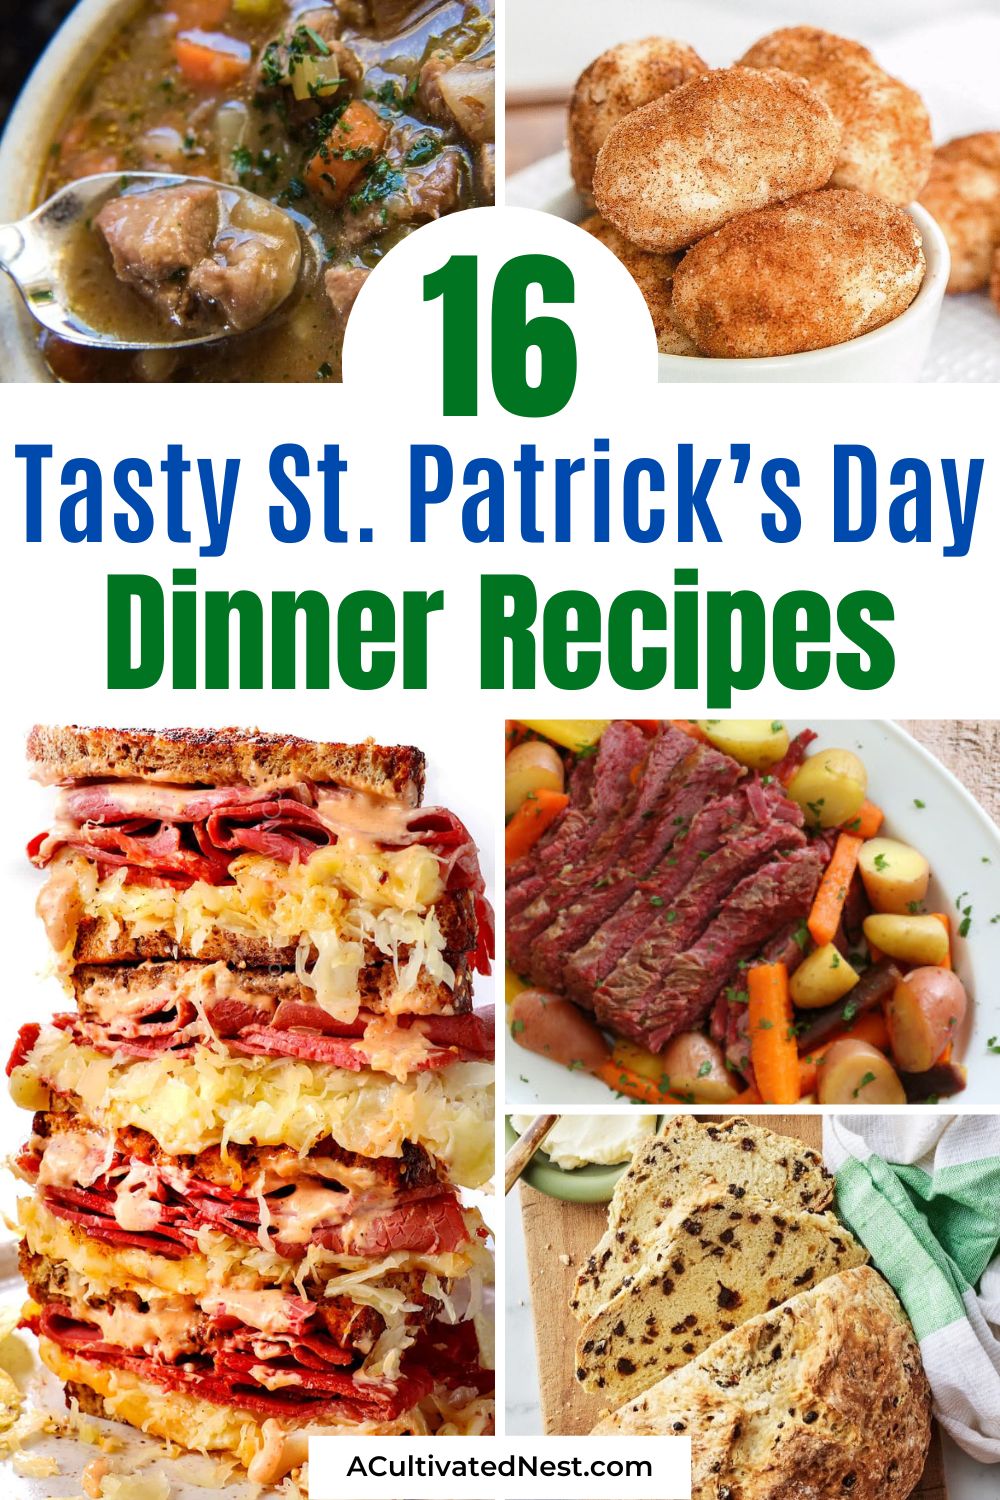 16 Delicious St. Patrick's Day Dinner Recipes- Celebrate St. Patrick's Day in style with these mouthwatering St. Patrick's Day dinner recipes! From traditional Irish stews to modern twists on classic dishes, savor the flavors of the Emerald Isle. | #StPatricksDay #DinnerRecipes #StPattysDay #recipeIdeas #ACultivatedNest